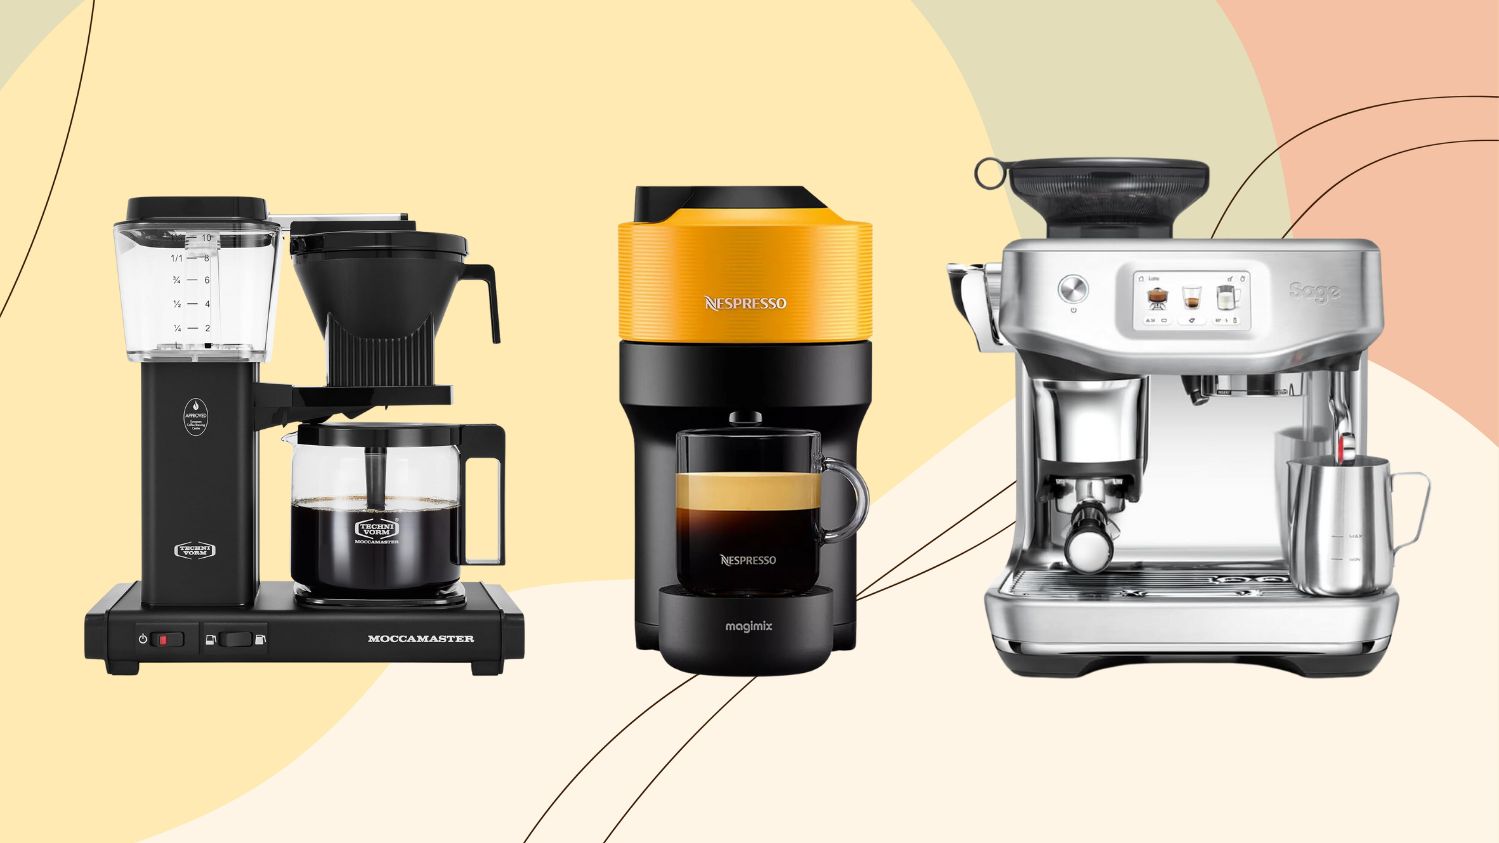 De'Longhi espresso machine at  is a great bang for your buck -  Reviewed